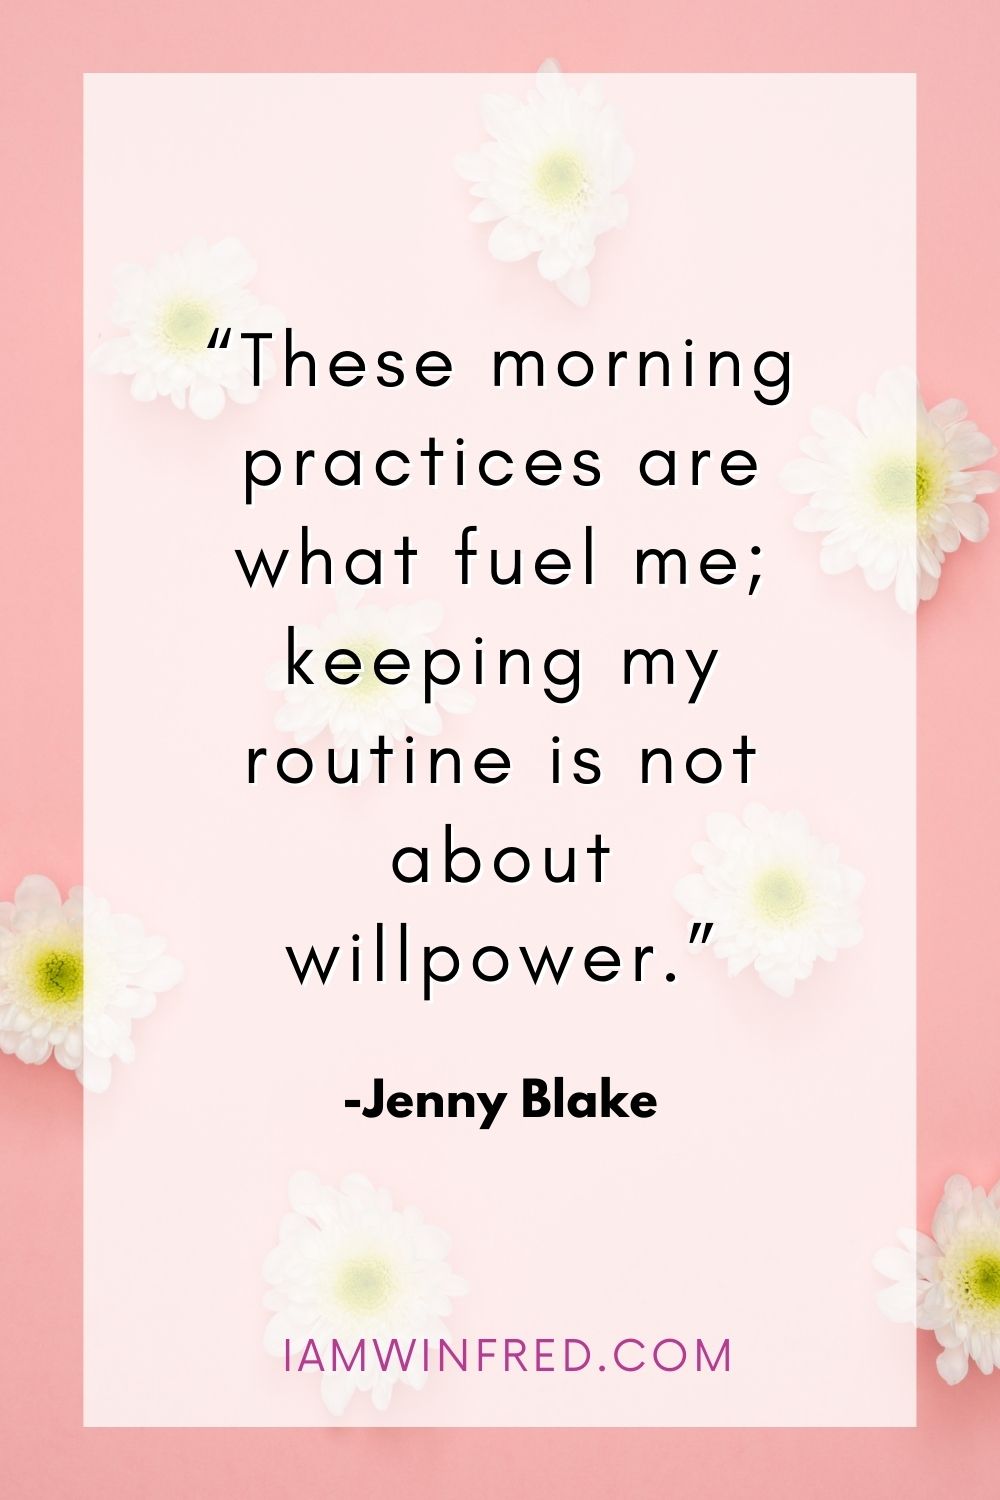 These Morning Practices Are What Fuel Me Keeping My Routine Is Not About Willpower.